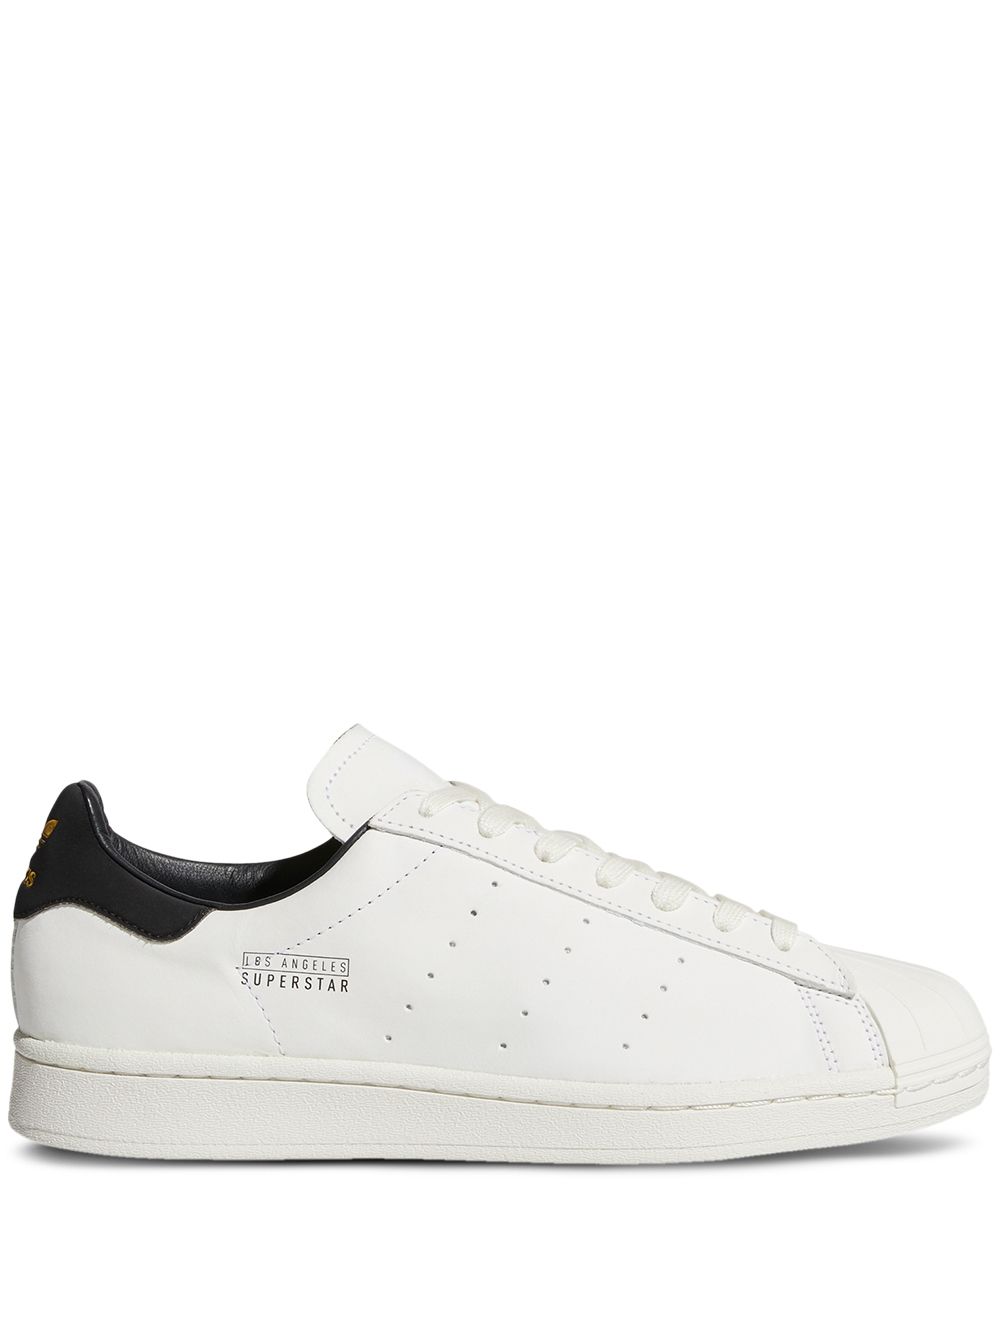 adidas superstar double sole